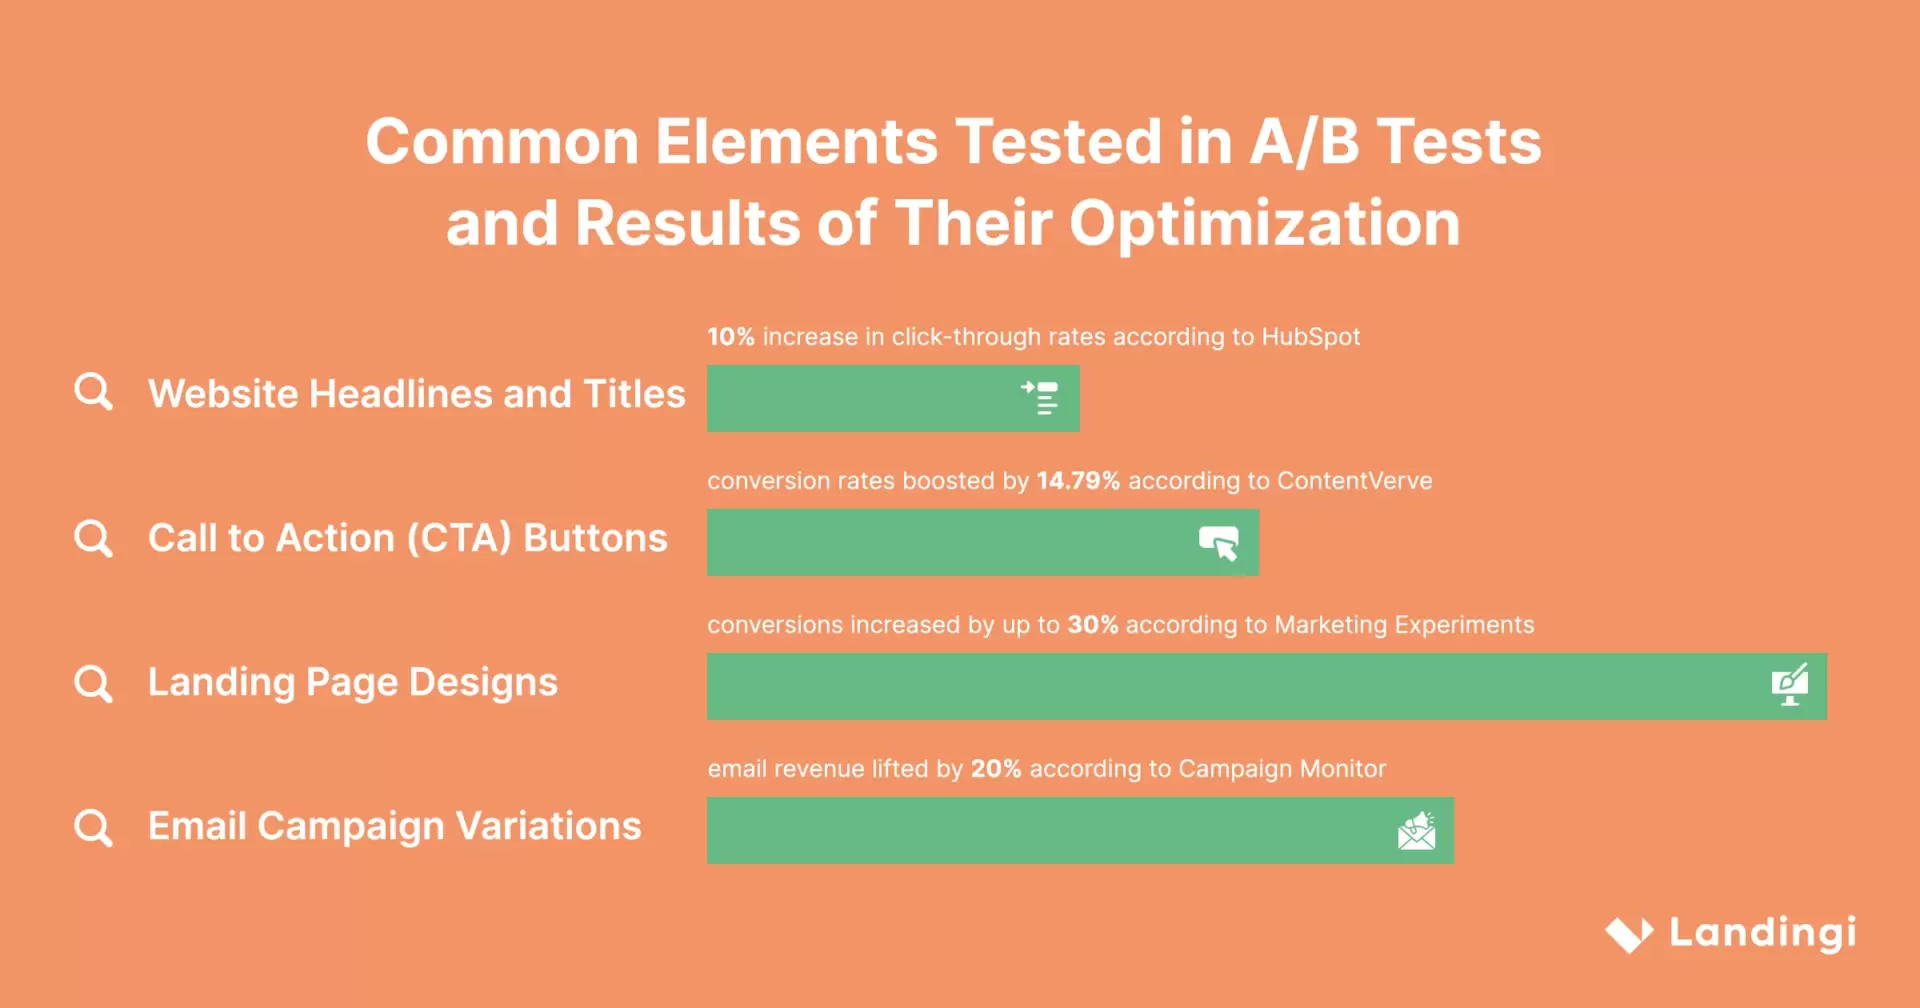 Common Elements Tested in A/B Tests